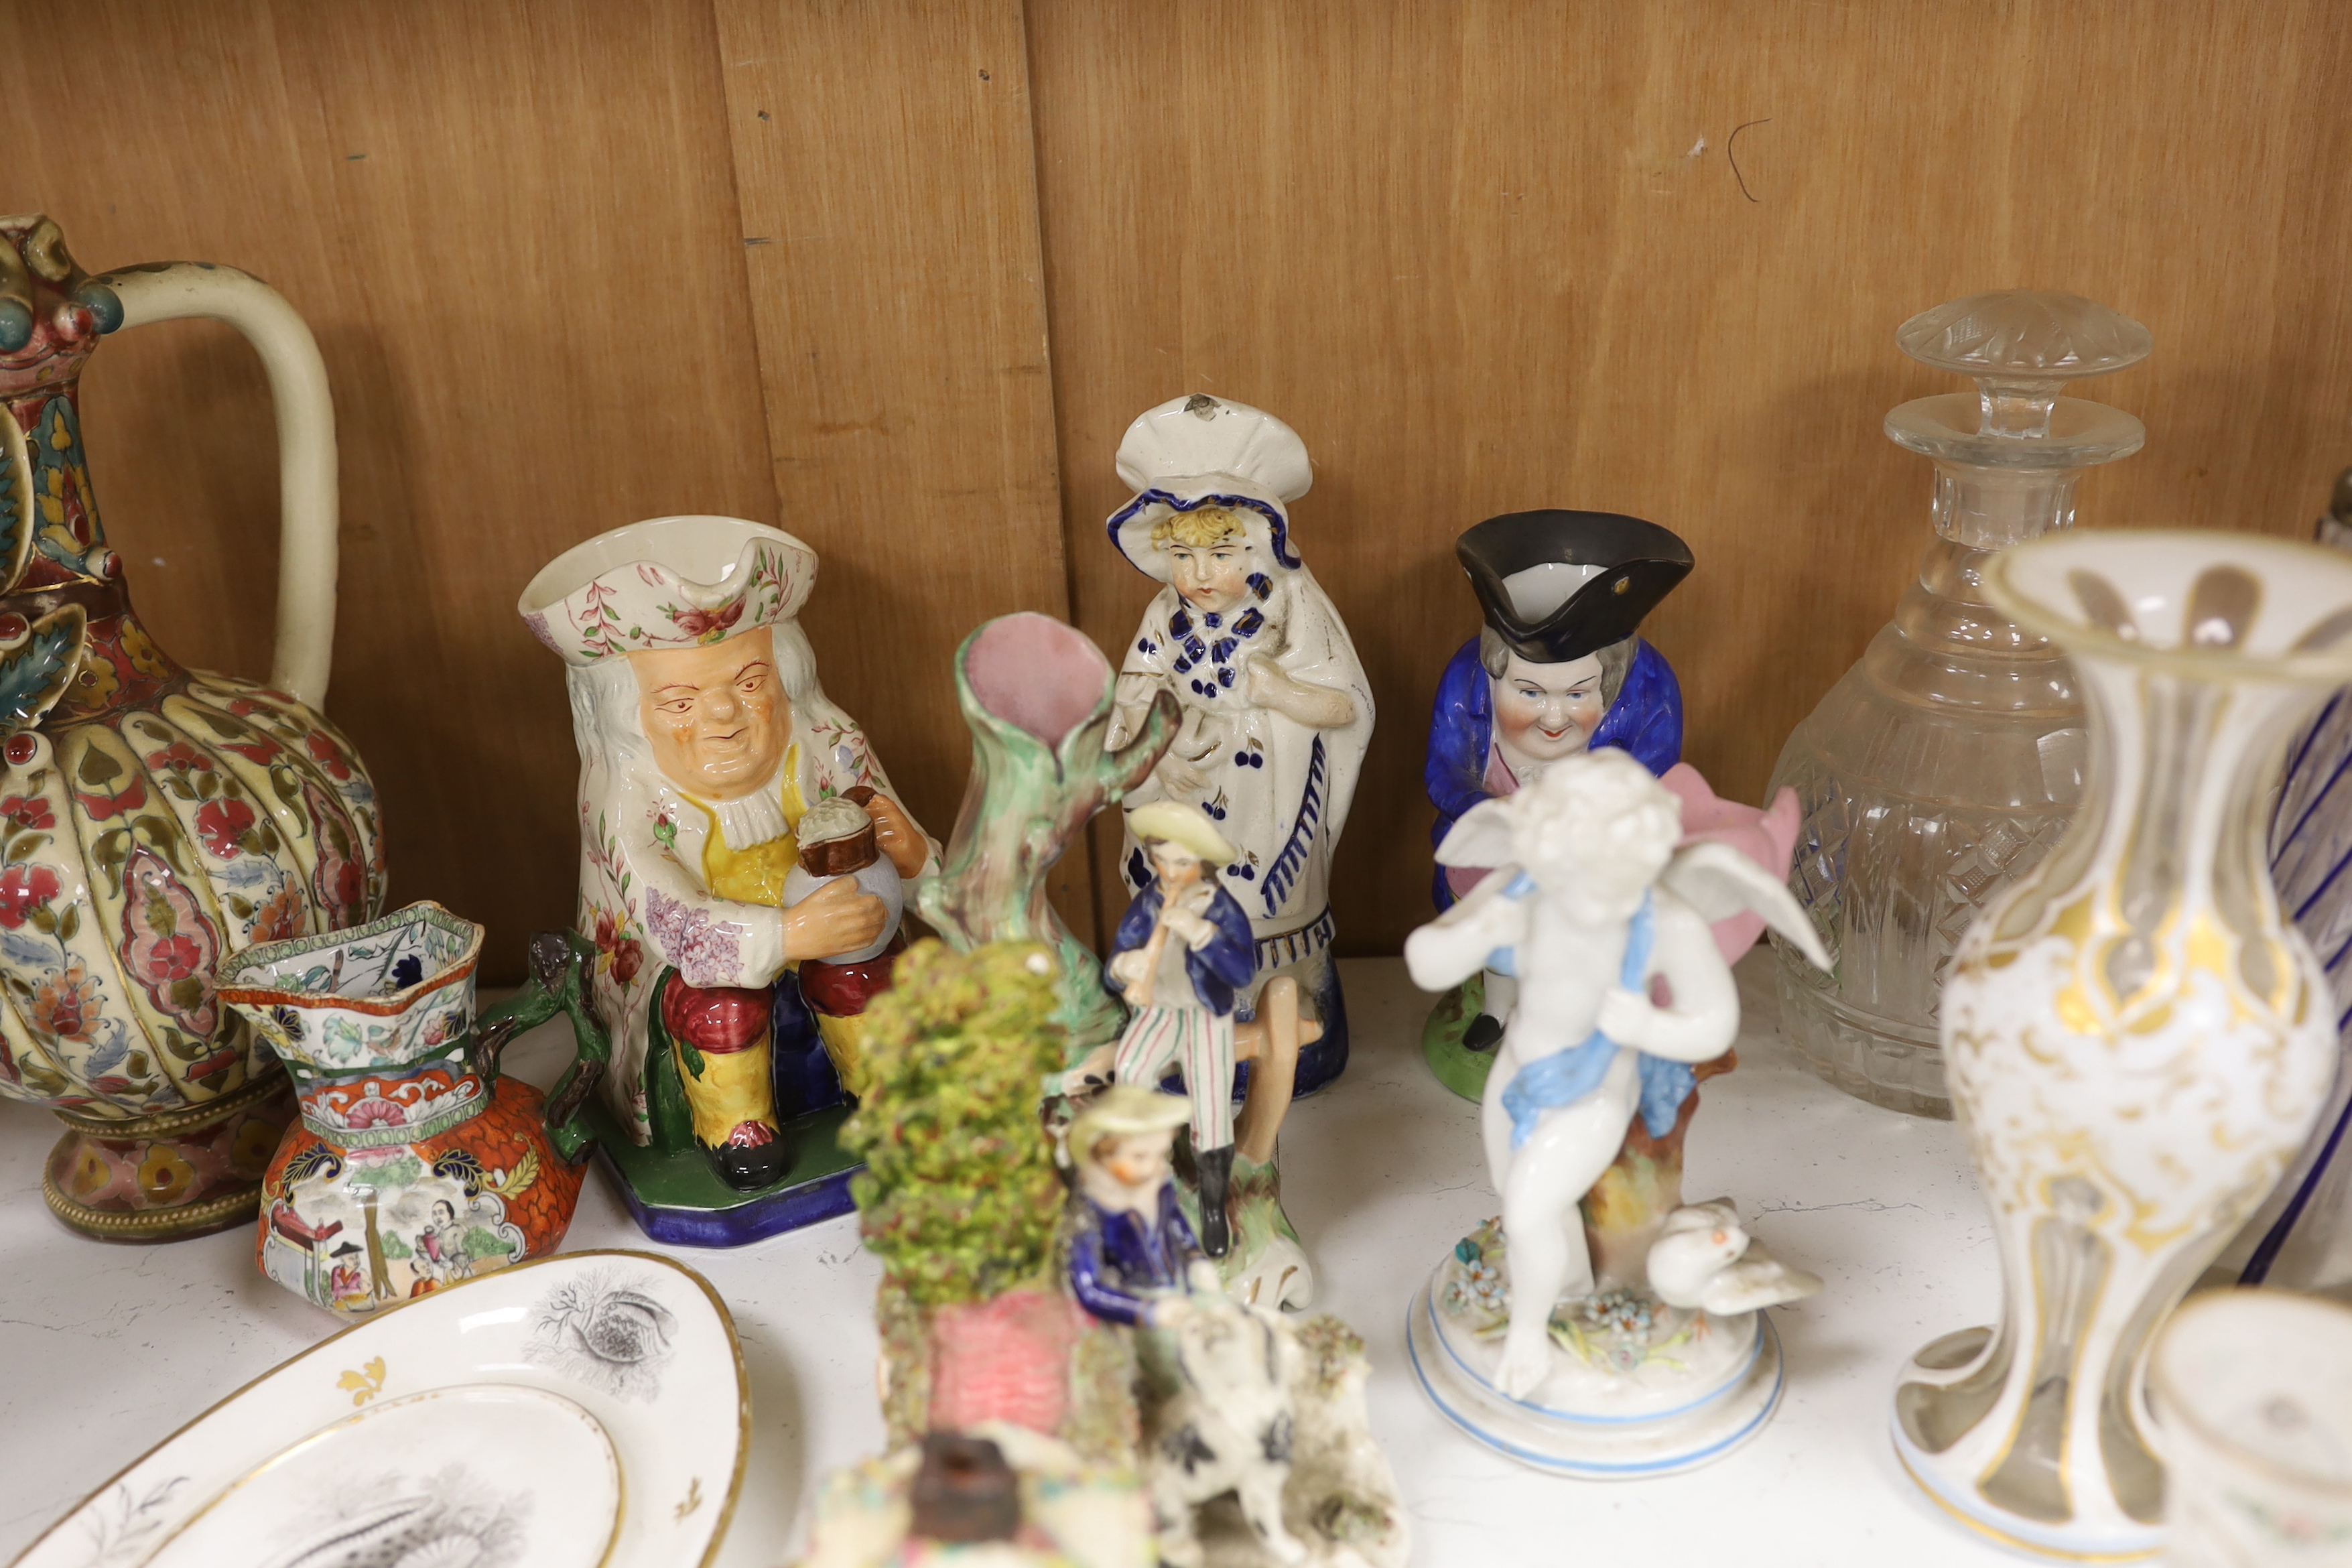 A quantity of mixed ceramics and glass to include Staffordshire, Zsolnay, Spode etc. Condition - poor